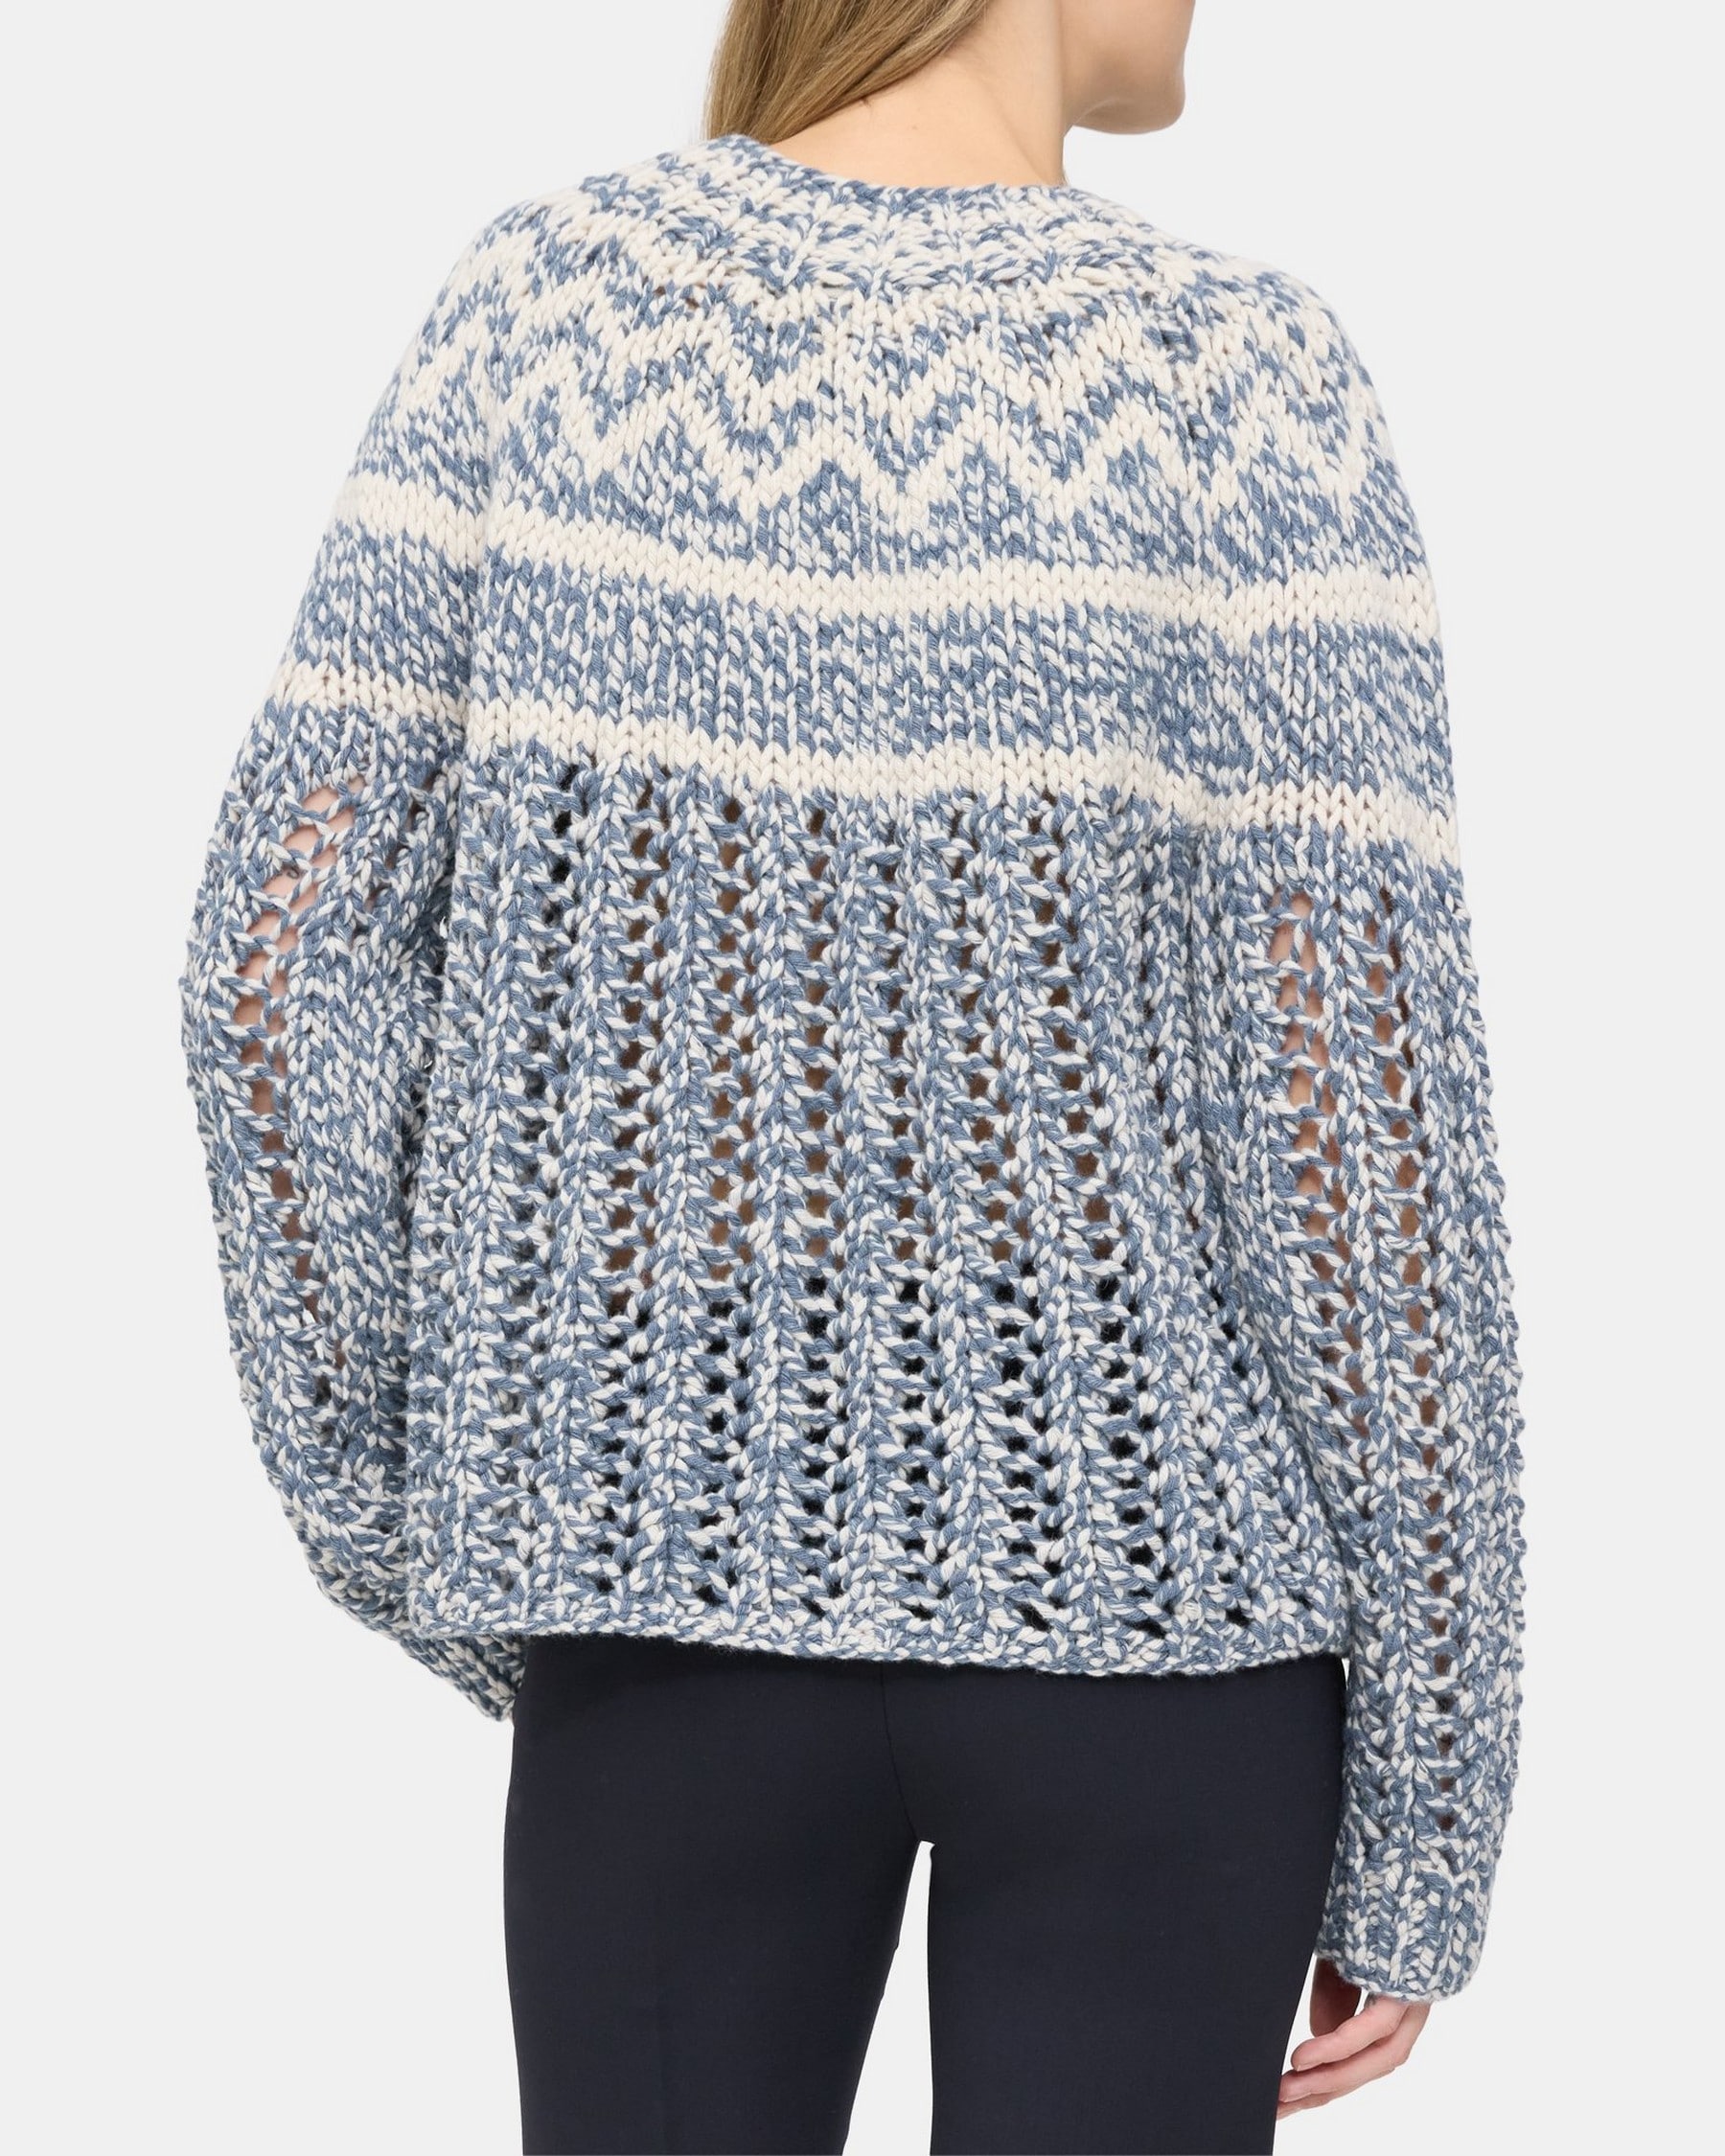 Chevron Sweater in Felted Wool-Cashmere